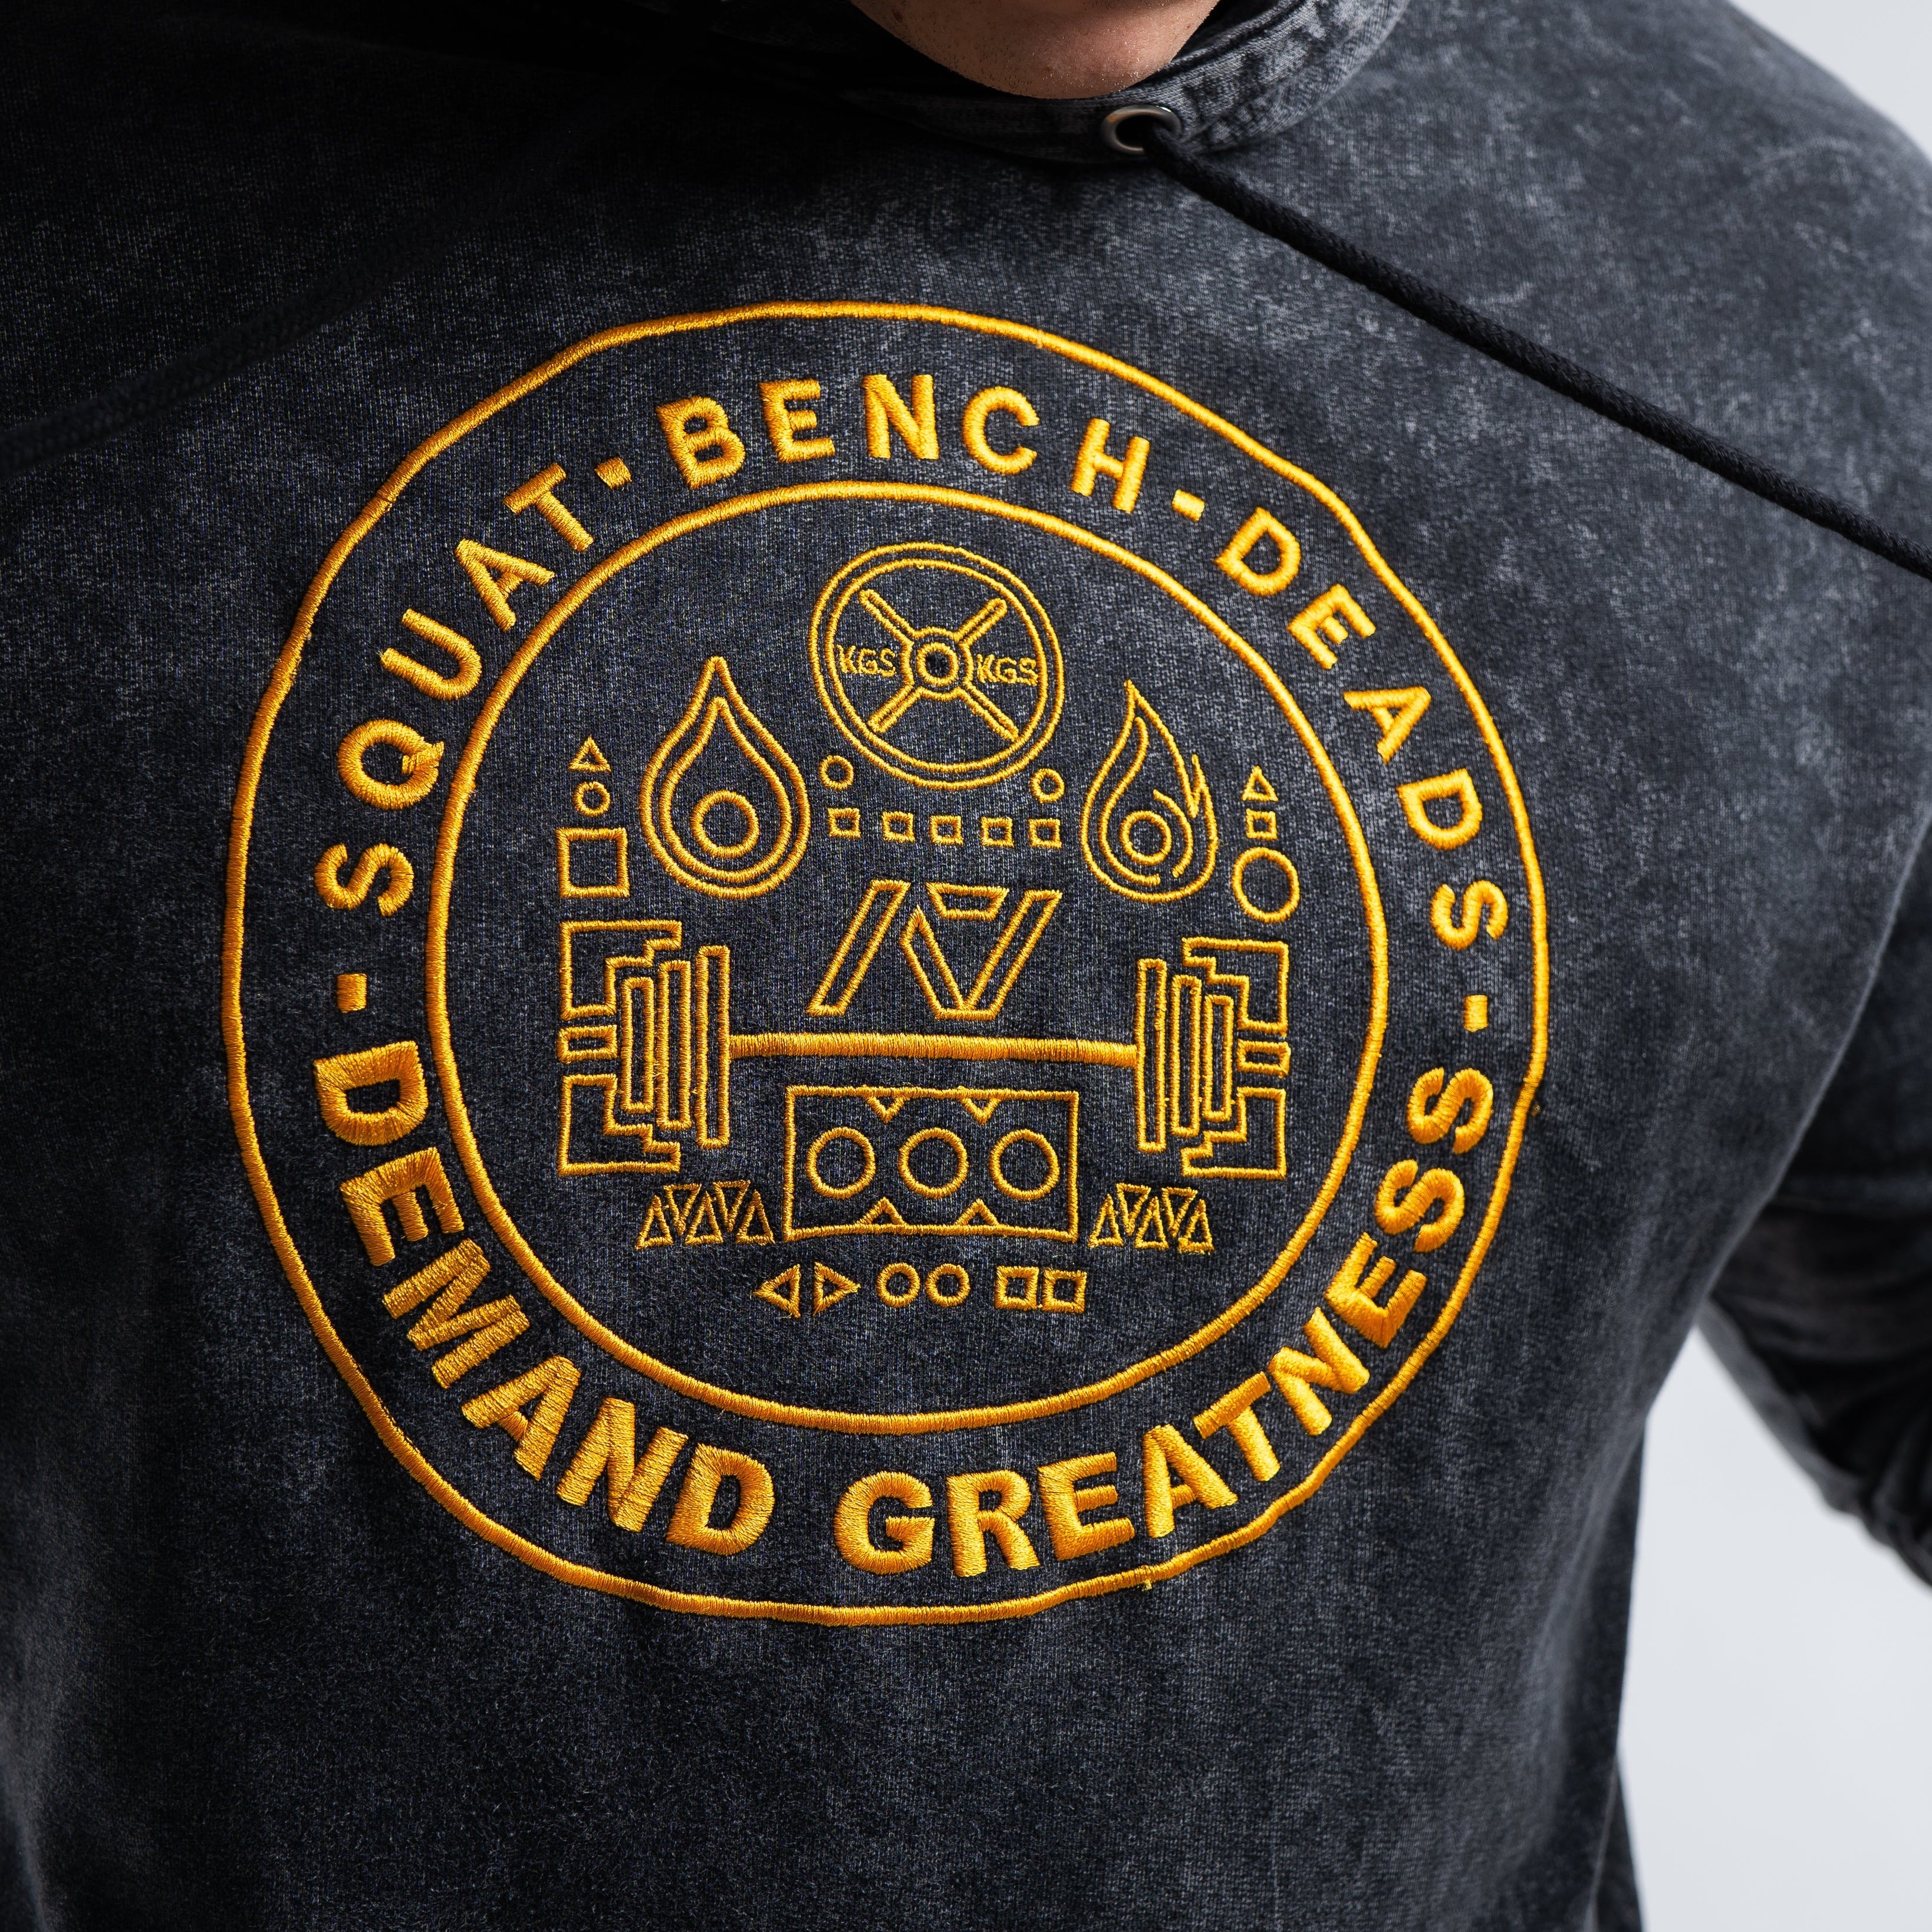 A single thread serves as the foundation of this collection. Thread, thoughtfully woven together to create a stronger bond, manifesting the showcase of its strength. Each strand connects the mindset of the athlete through their actions. Building a stronger foundation and the development of their Gold Medal Mentality. Genouill�res powerlifting shipping to France, Spain, Ireland, Germany, Italy, Sweden and EU.